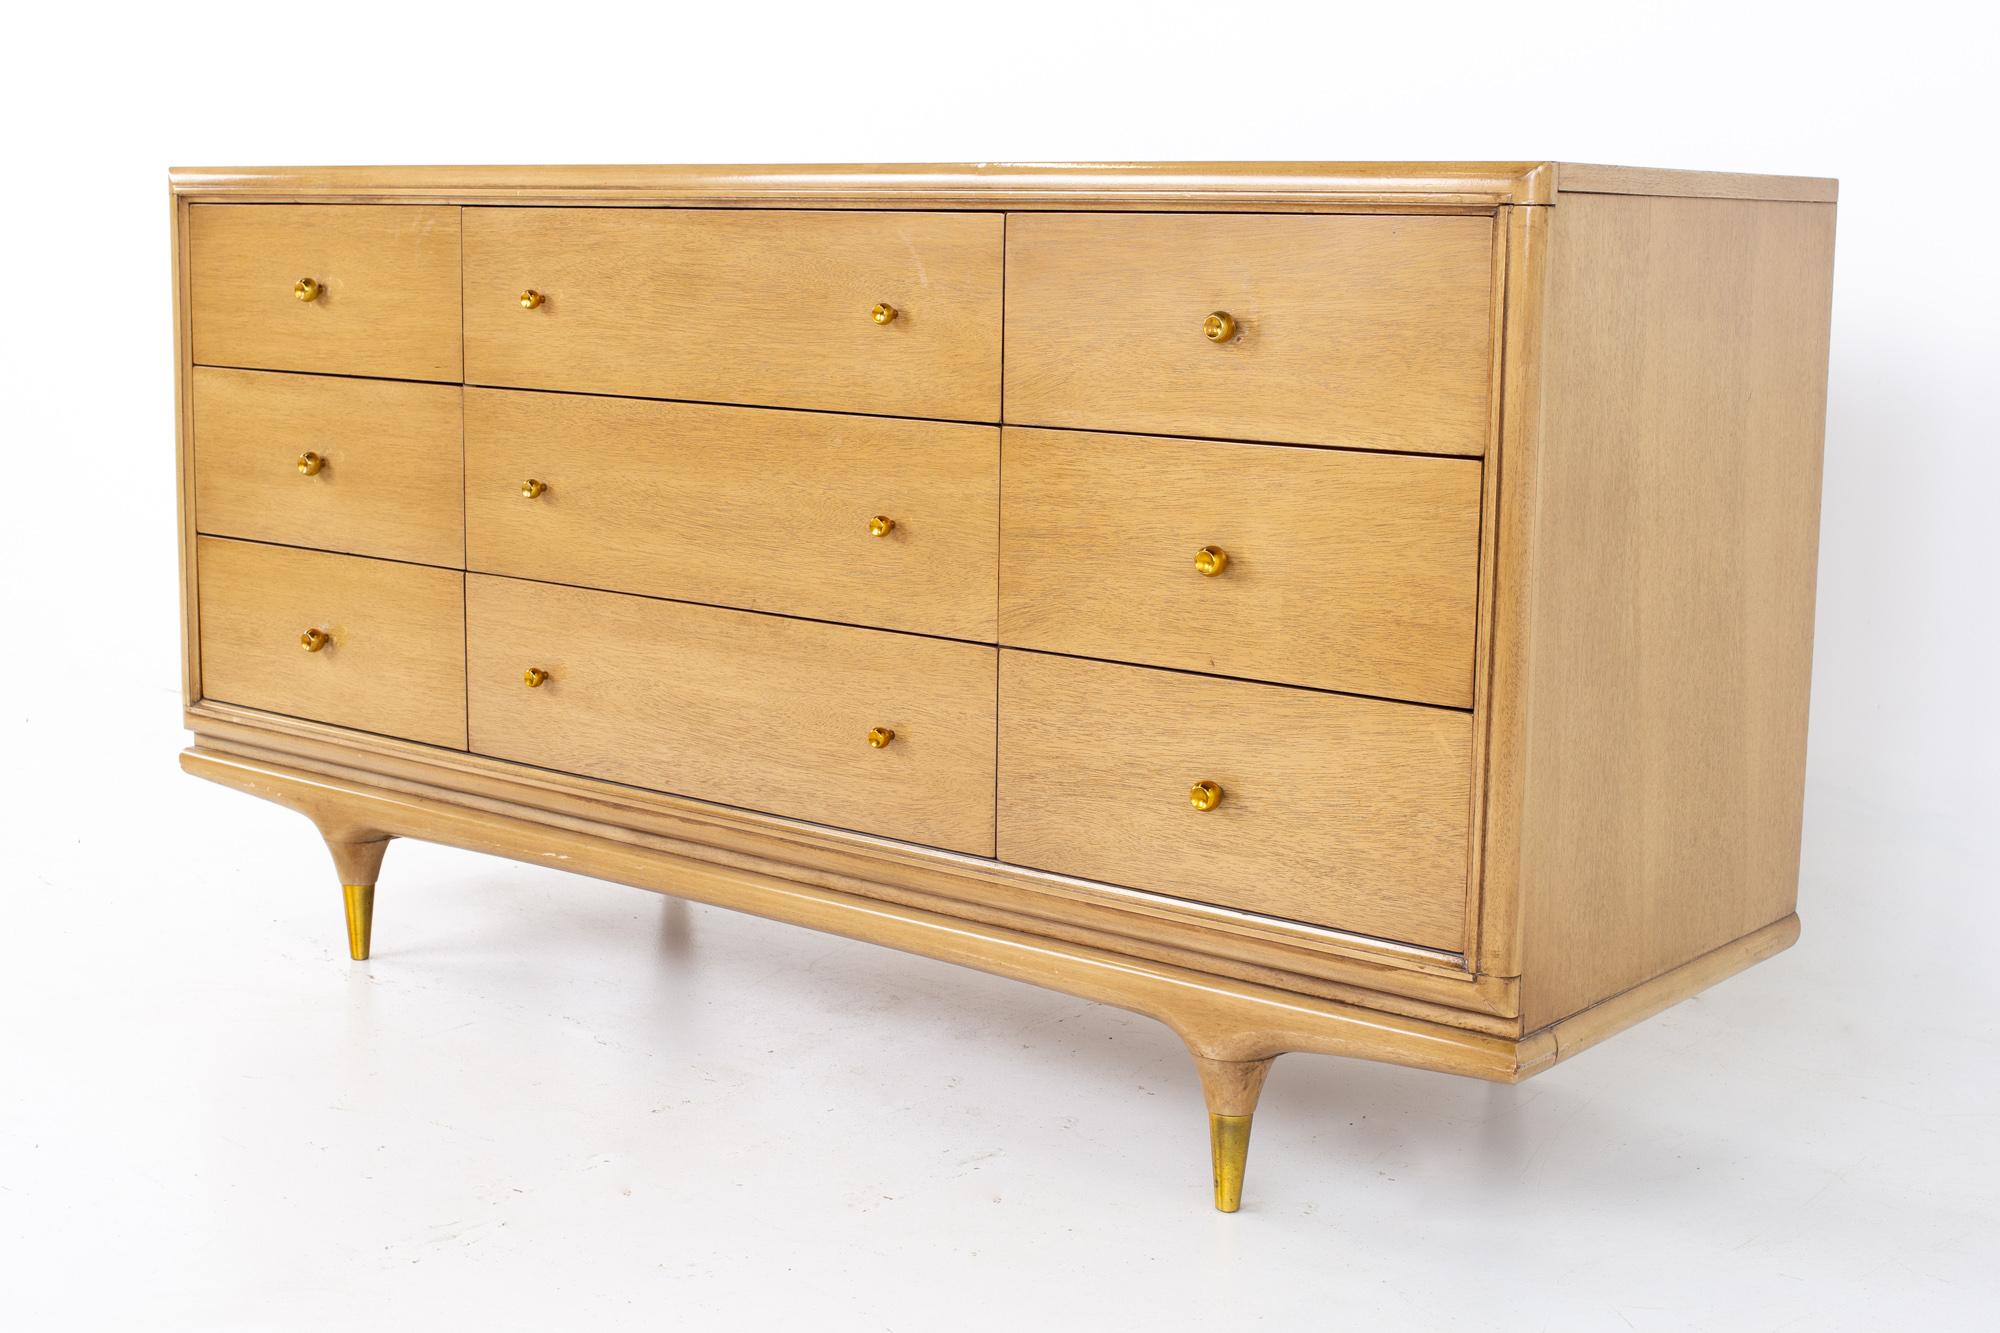 Kent Coffey Continental mid century walnut and brass 9 drawer lowboy dresser
Dresser measures: 64 wide x 21 deep x 32.75 inches high

All pieces of furniture can be had in what we call restored vintage condition. That means the piece is restored